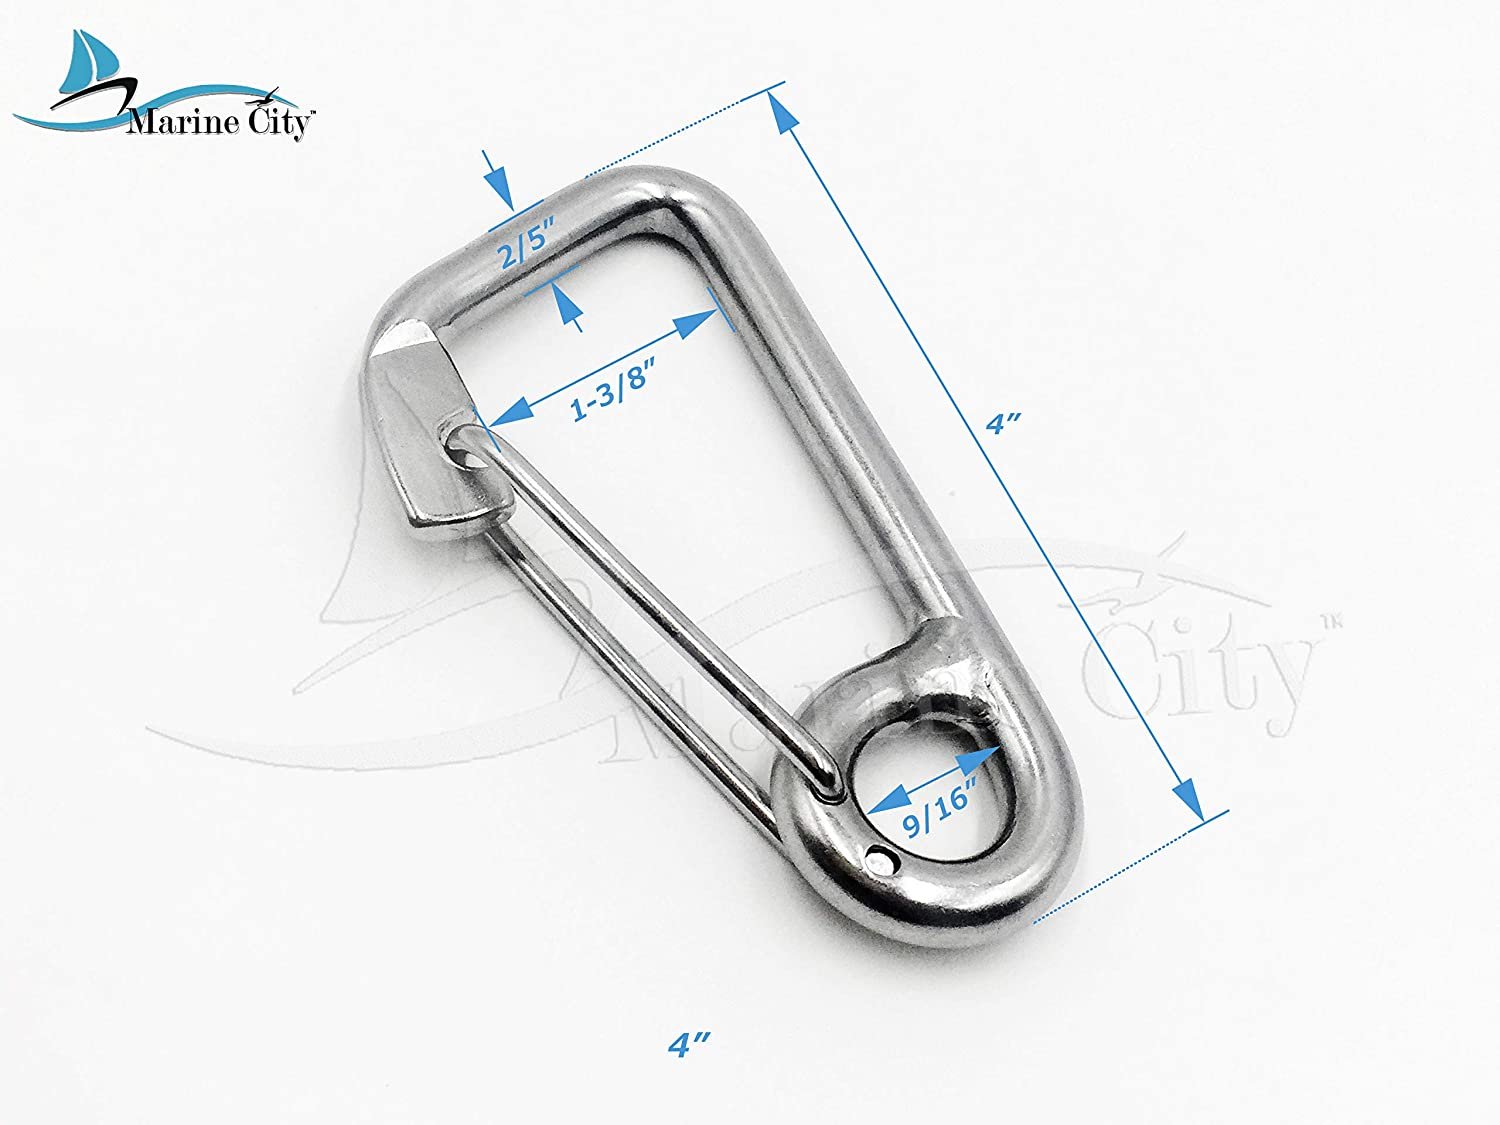 Marine City 316 Marine Grade Stainless Steel Carabiner Spring Snap Hook Boat C:2-3/8 inches - image 4 of 9